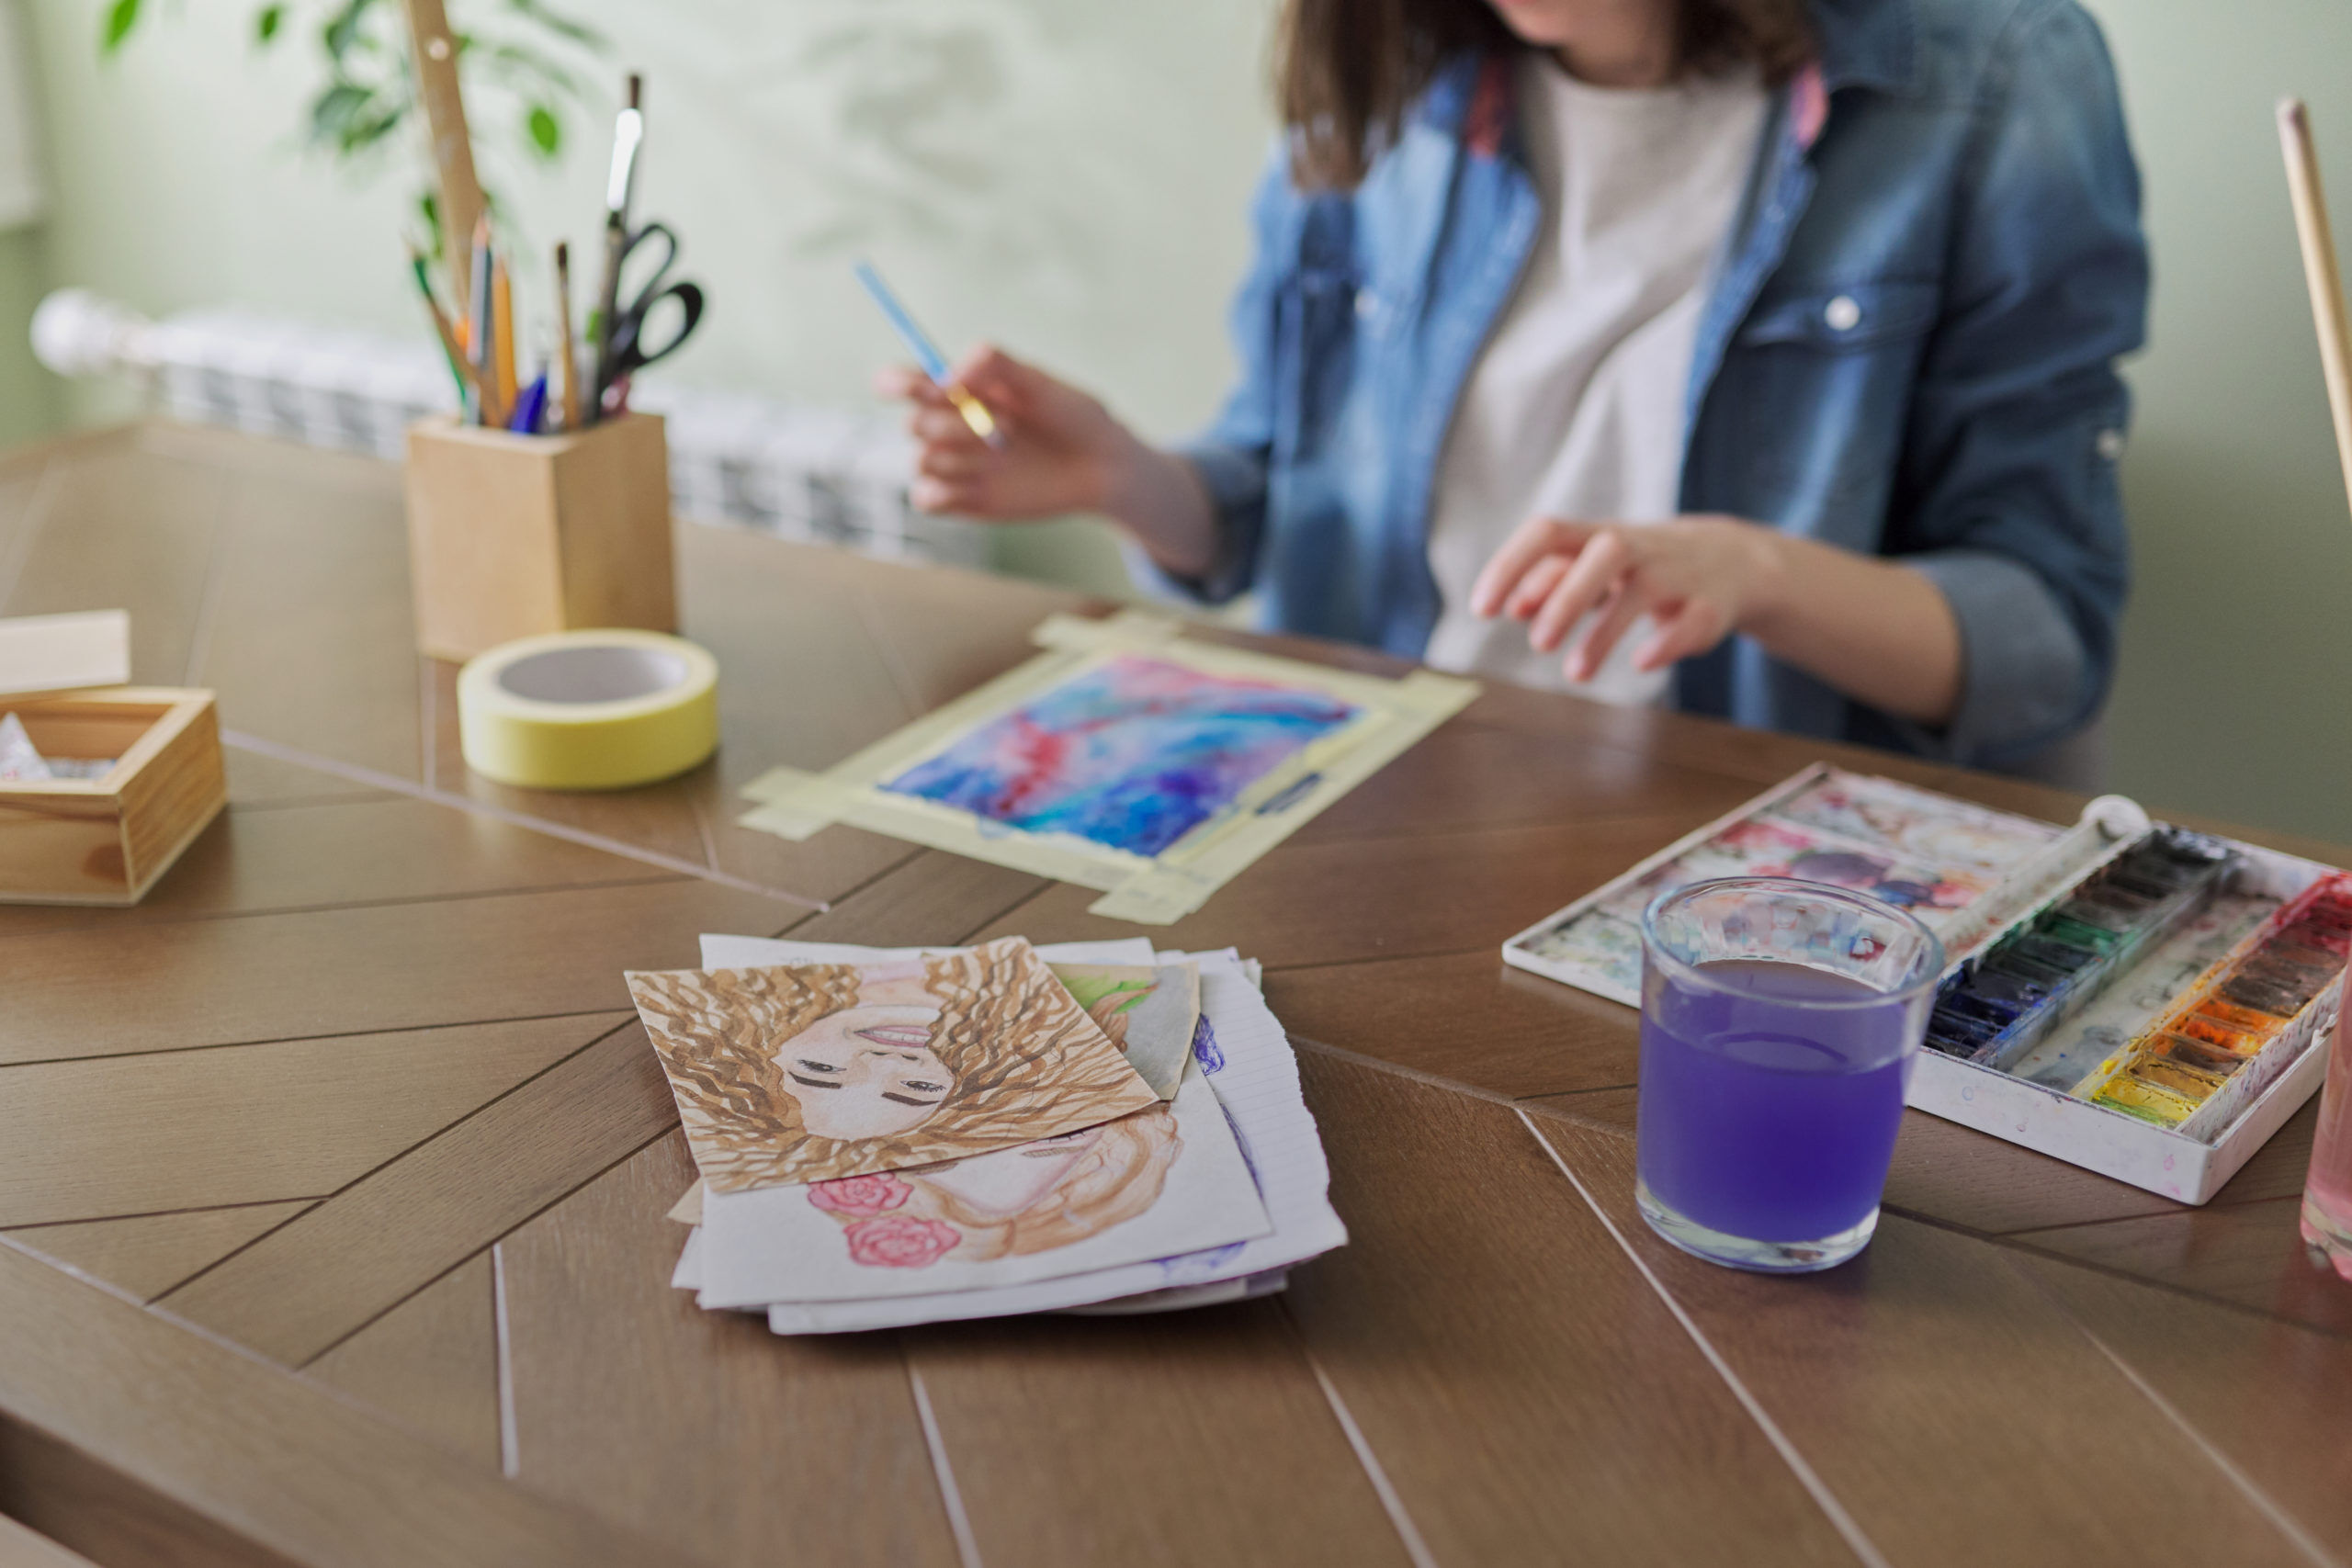 teenager-girl-painting-with-watercolors-sitting-at-home-at-the-table-art-education-creativity-teenage-hobbies